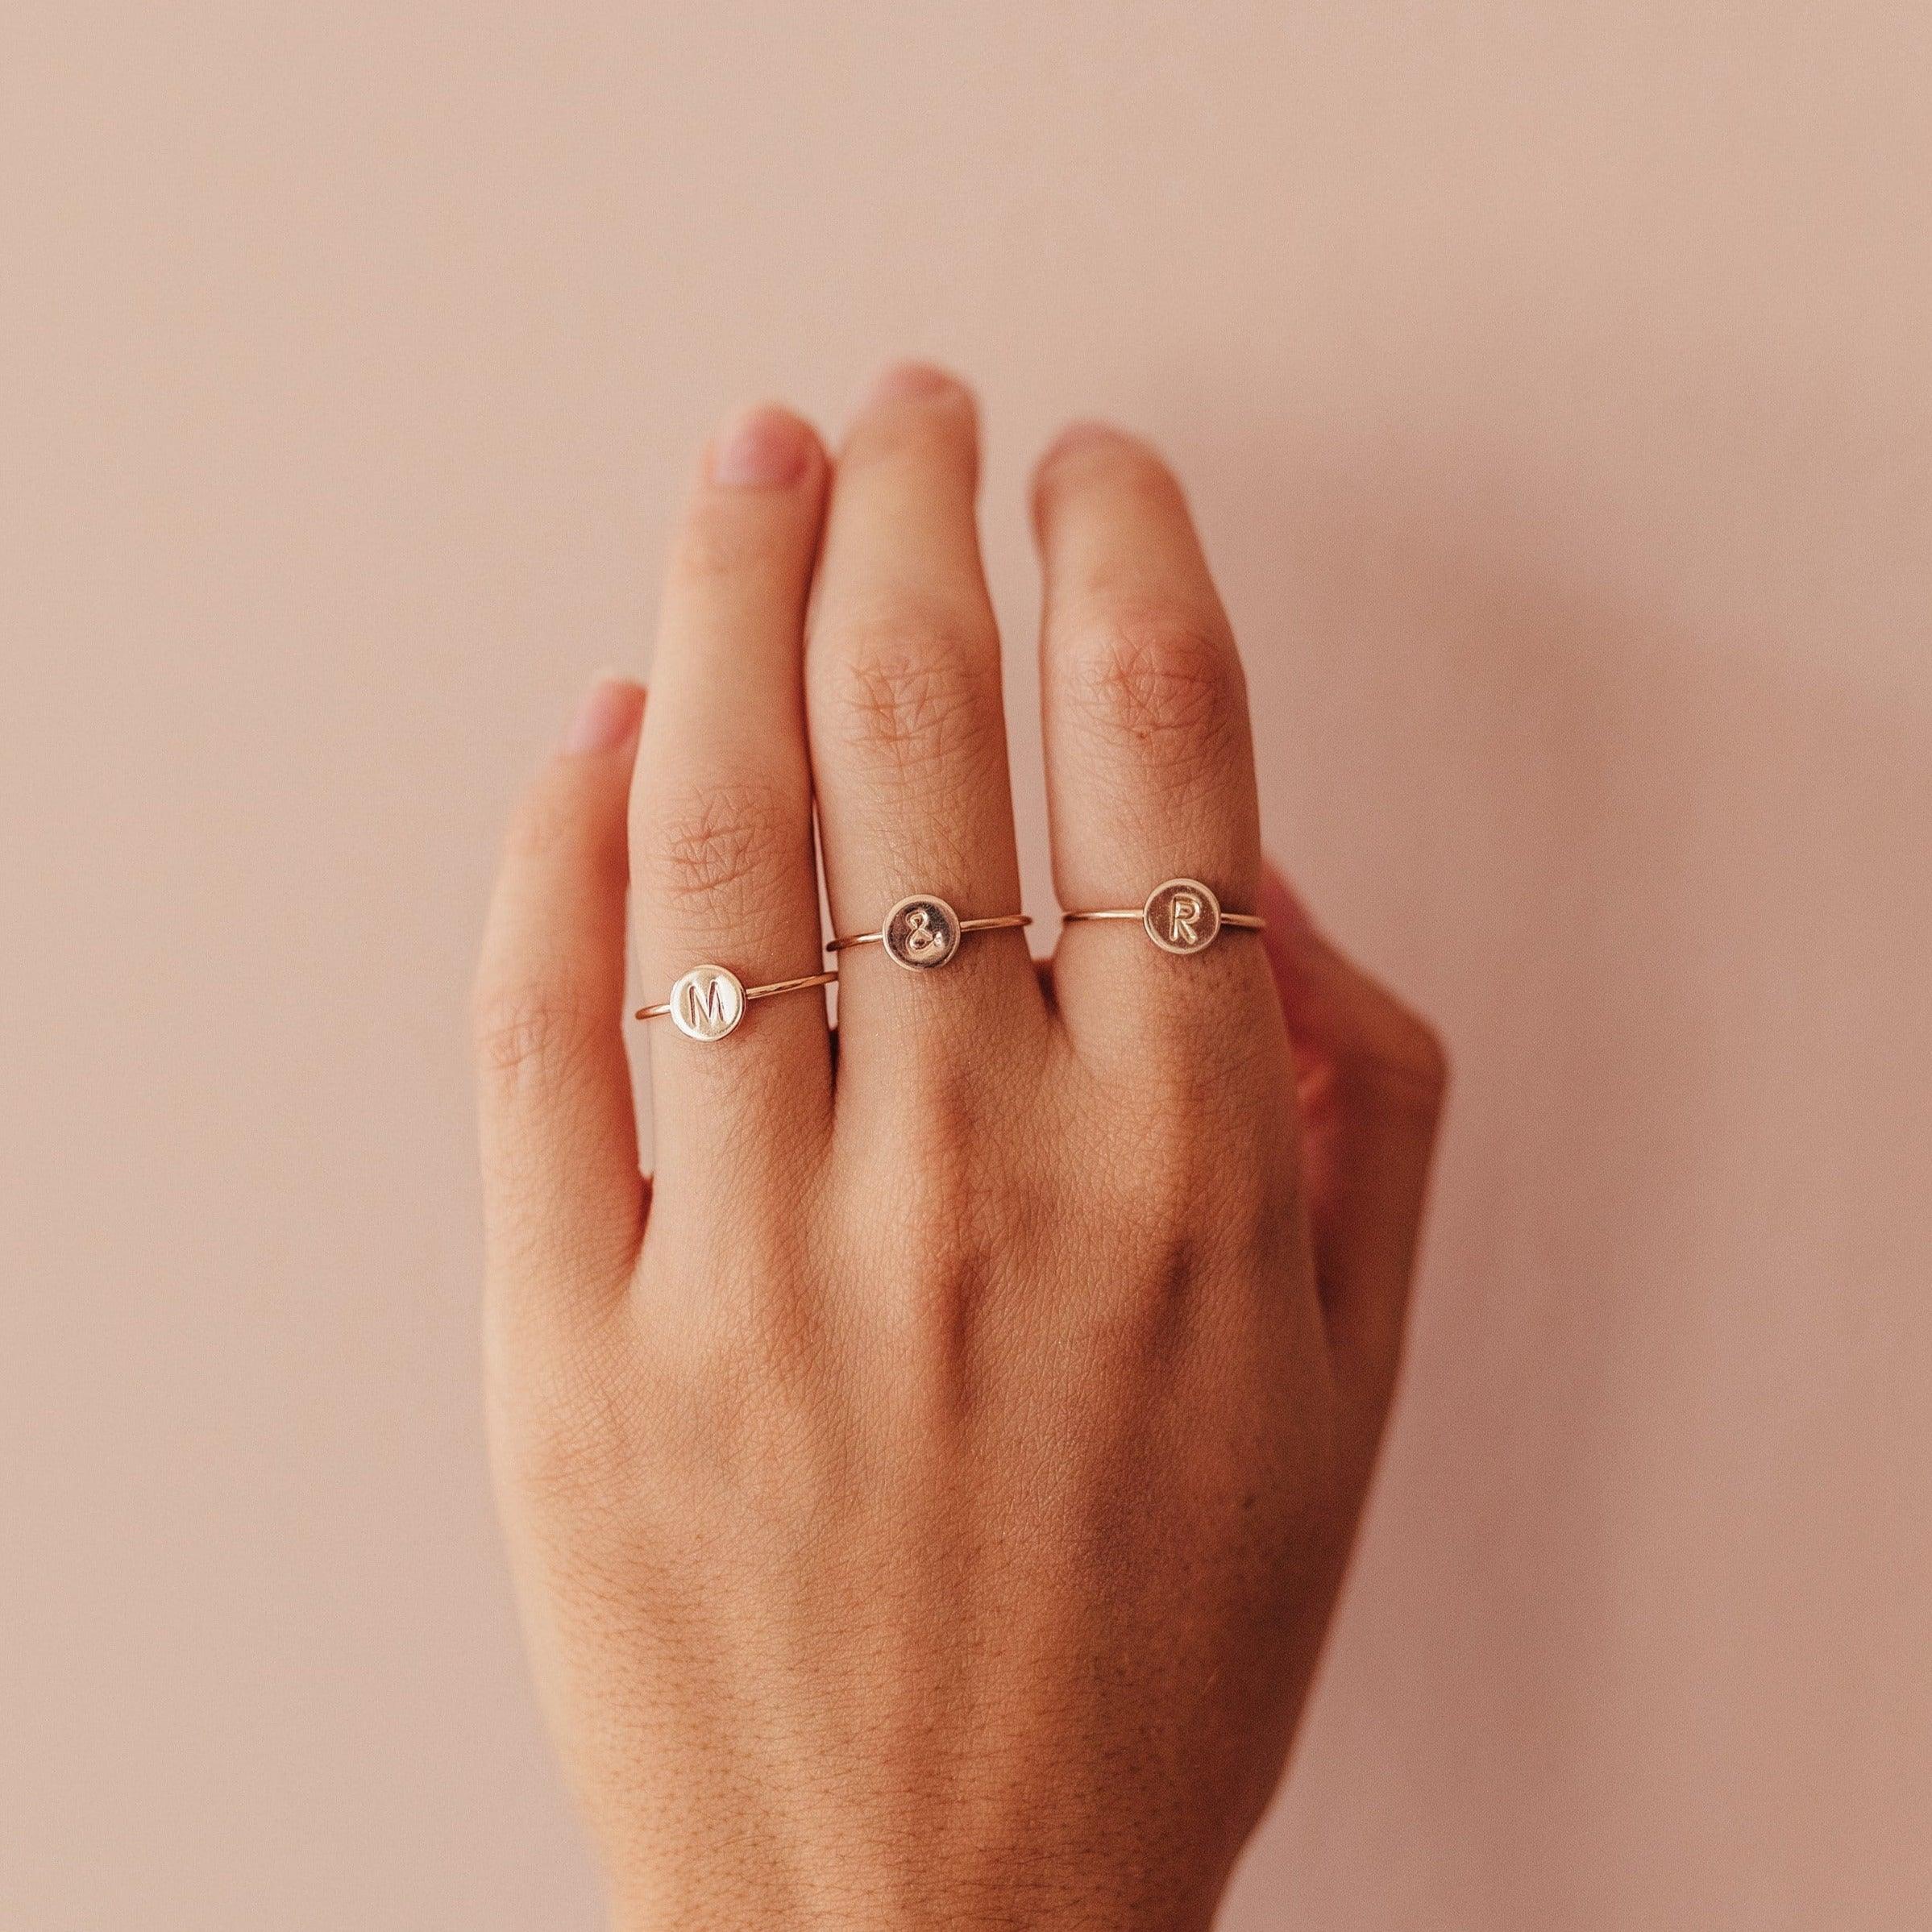 Initial Disc Ring - Nolia Jewelry - Meaningful + Sustainably Handcrafted Jewelry